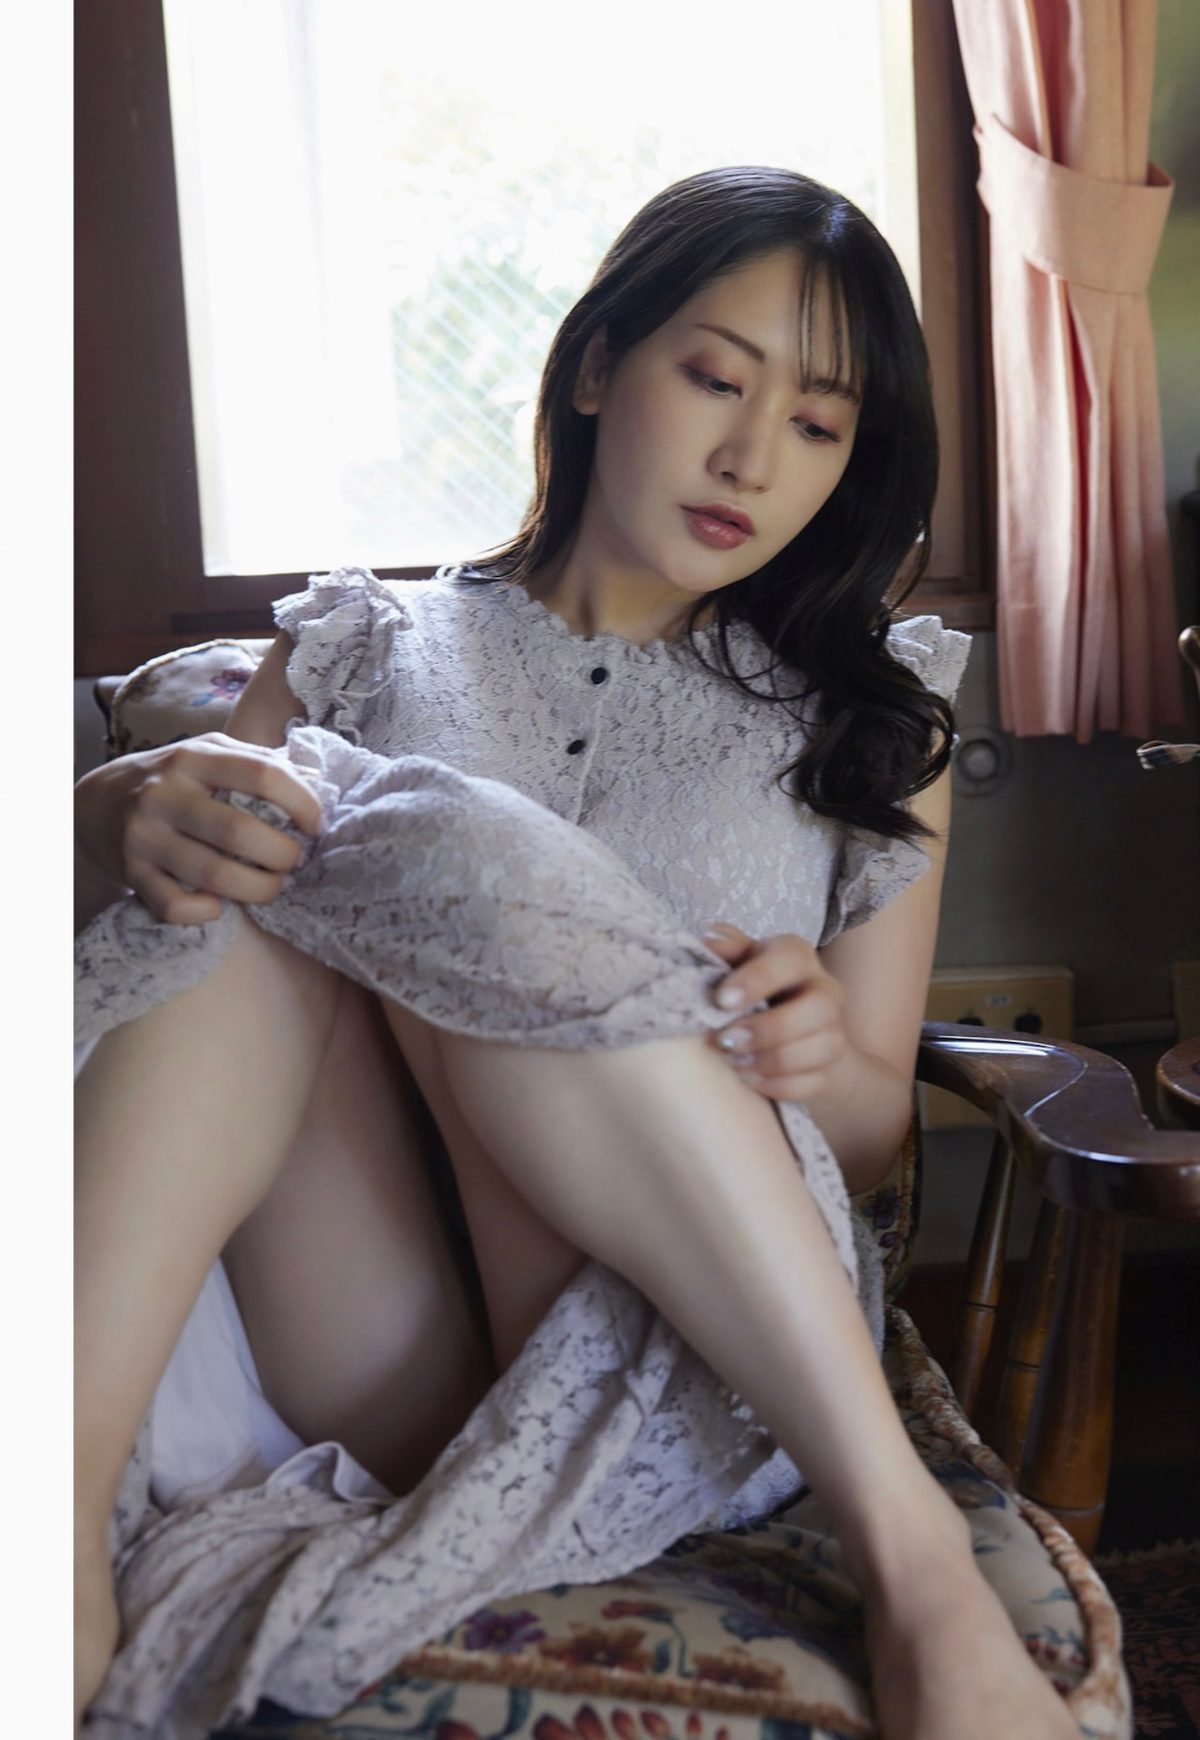 View - Hitomi Takamine 高嶺ひとみ HITOMI A - 